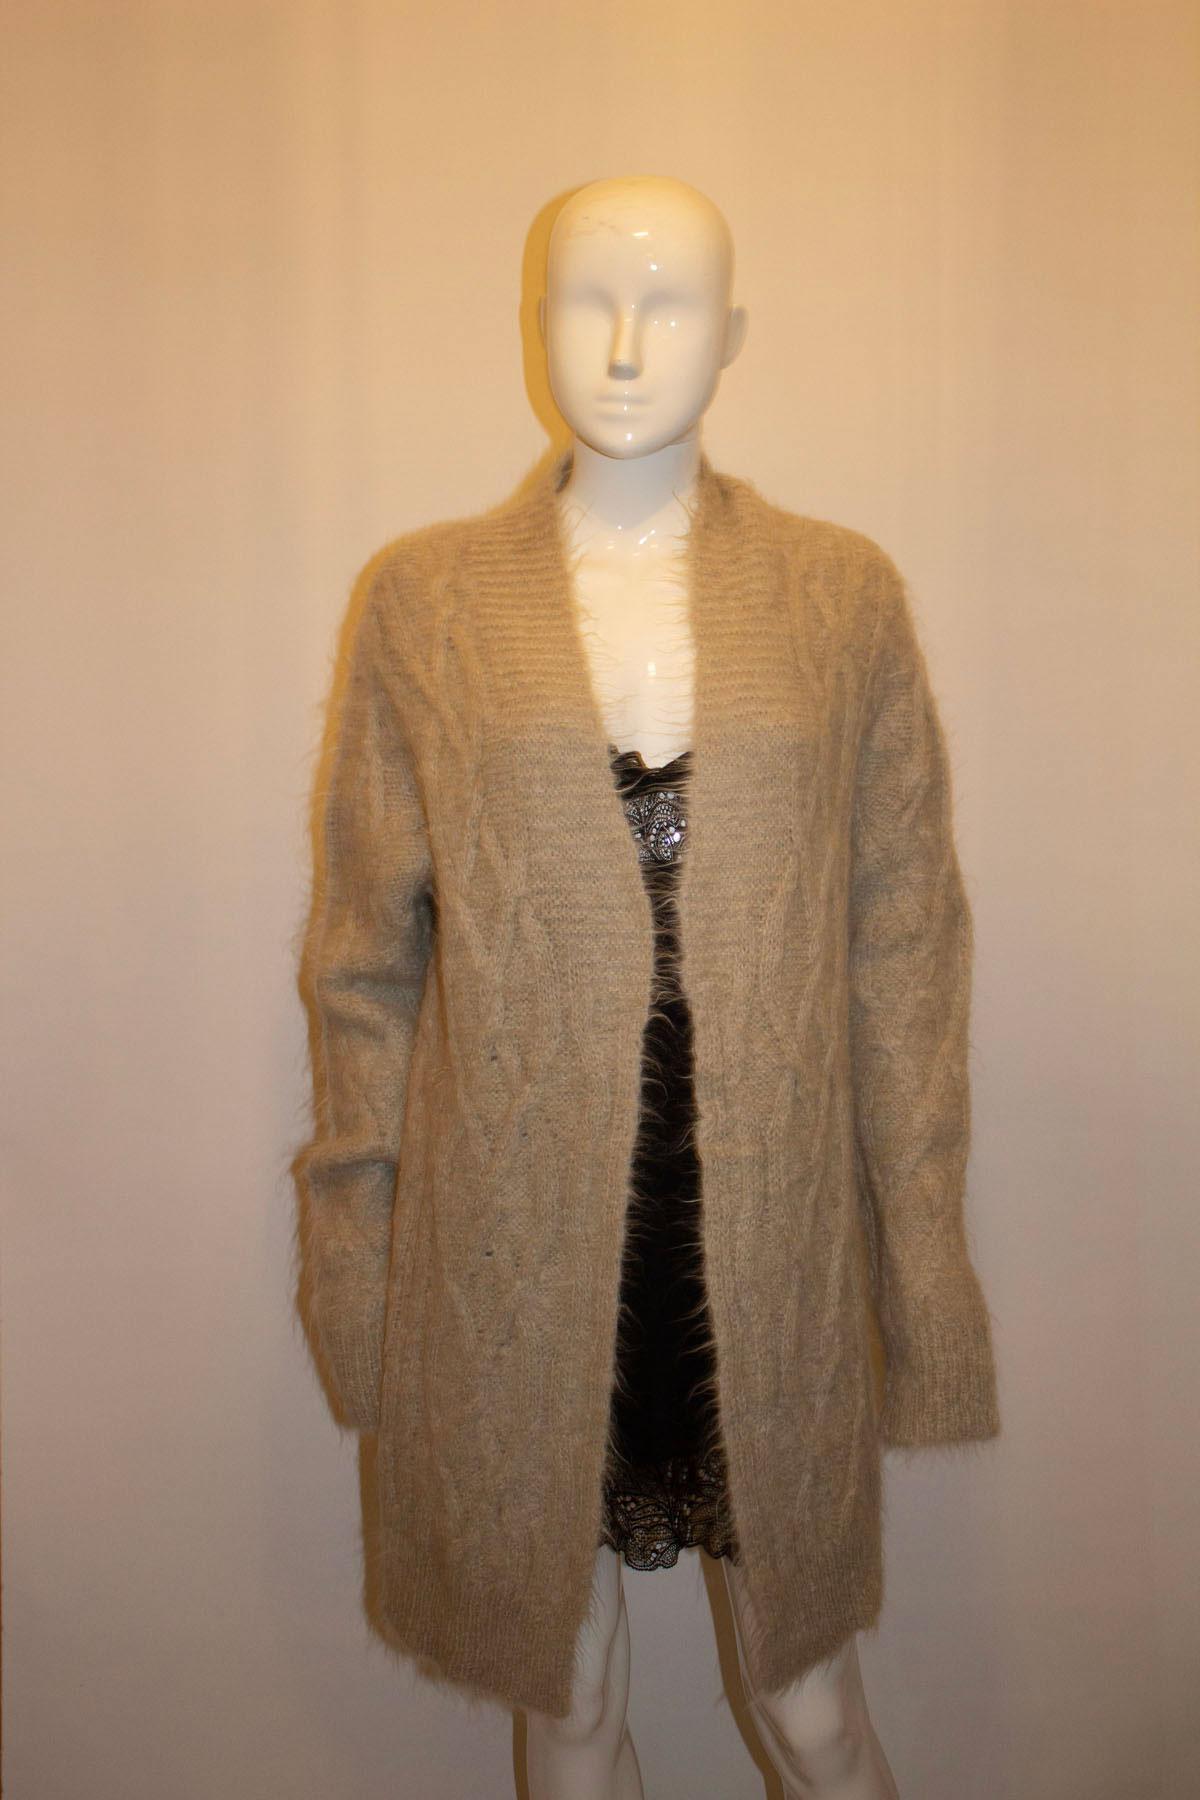 Dries Van Noten Knitted Wool Mix Jacket In Good Condition For Sale In London, GB